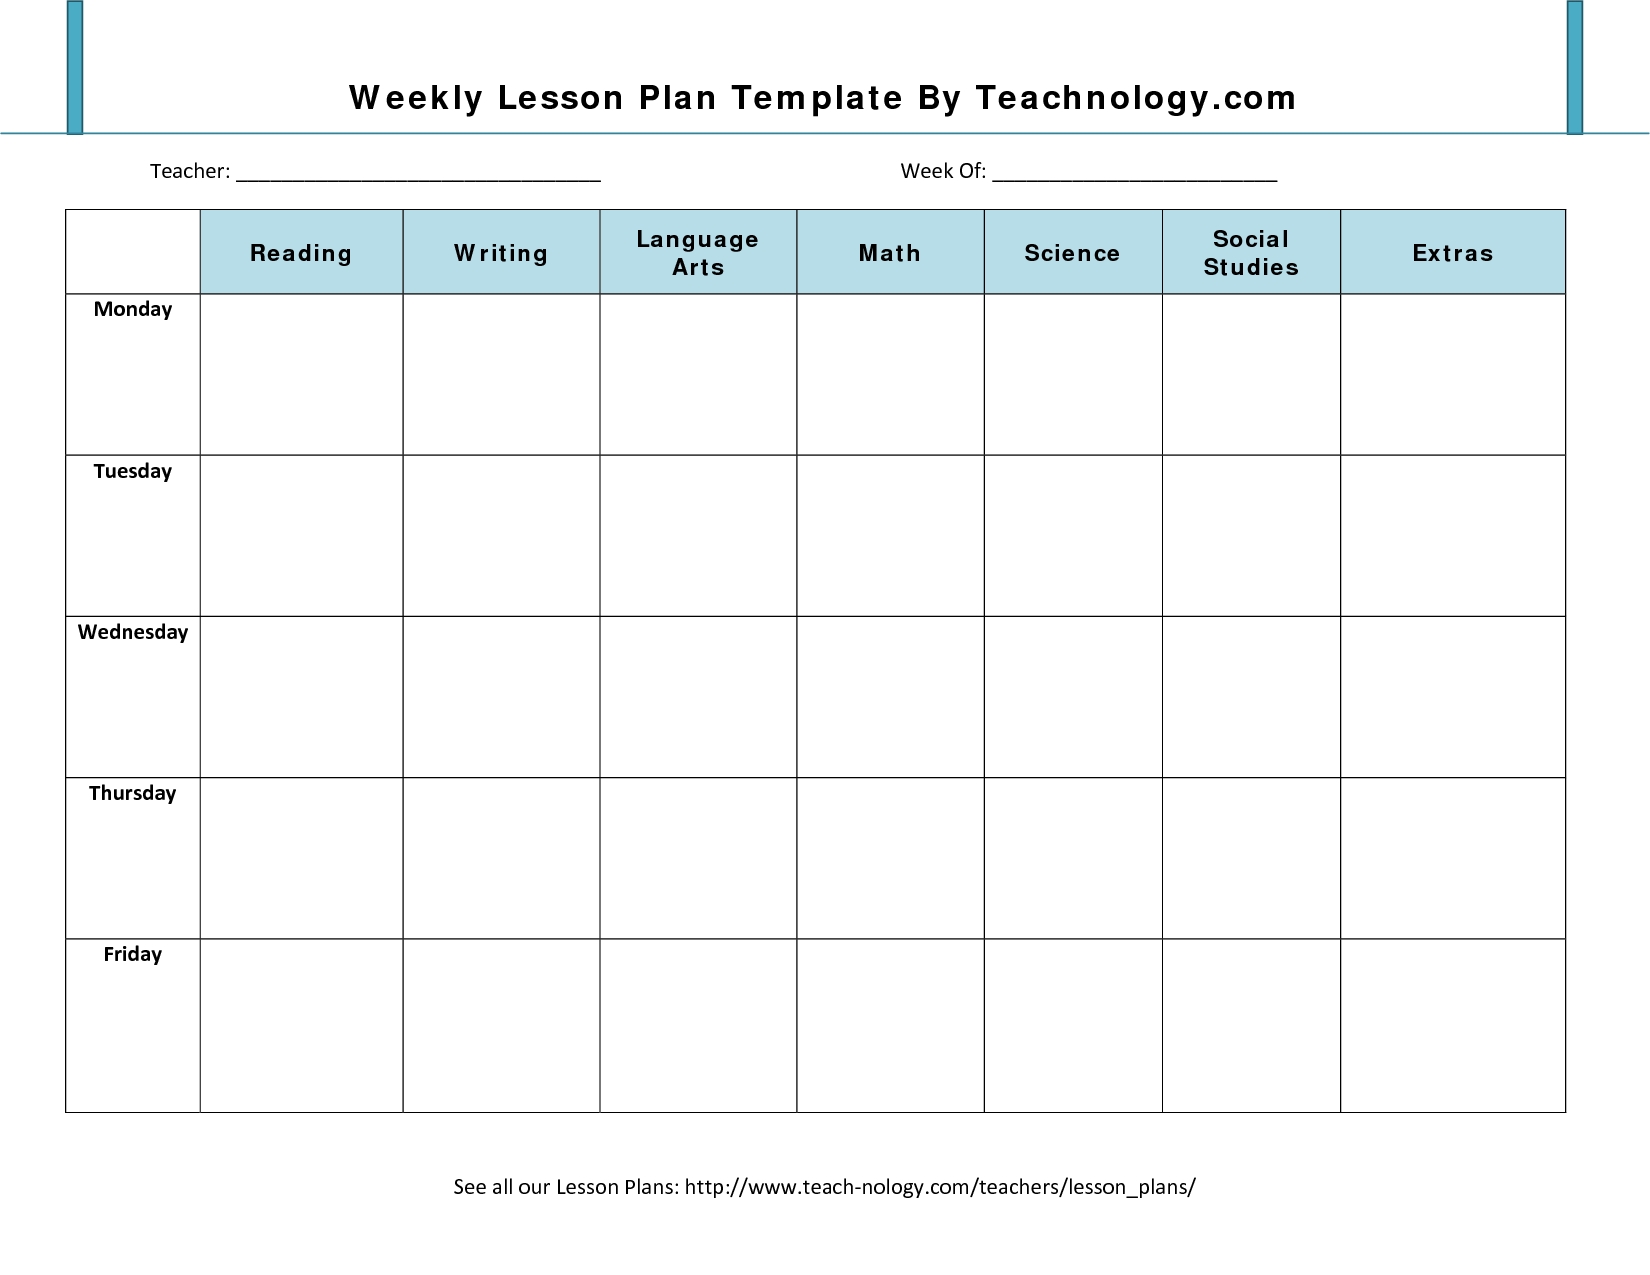 Lesson Plan Format 7 Weekly Lesson Plan Template For-Weekly Lesson Plan Blank Template